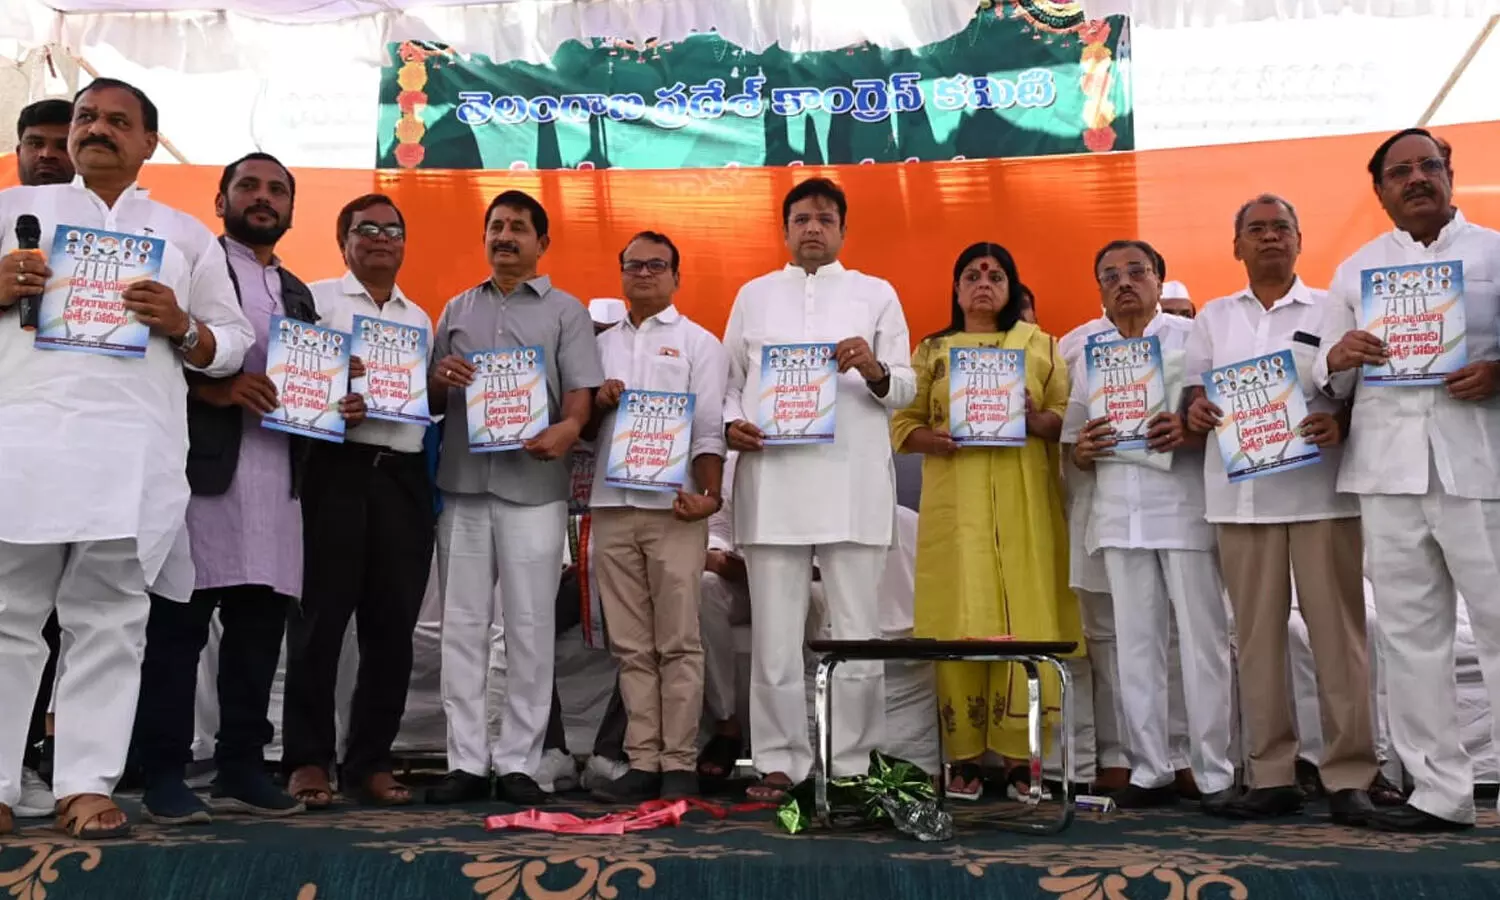 Congress party makes 23 major promises in a special manifesto for Telangana